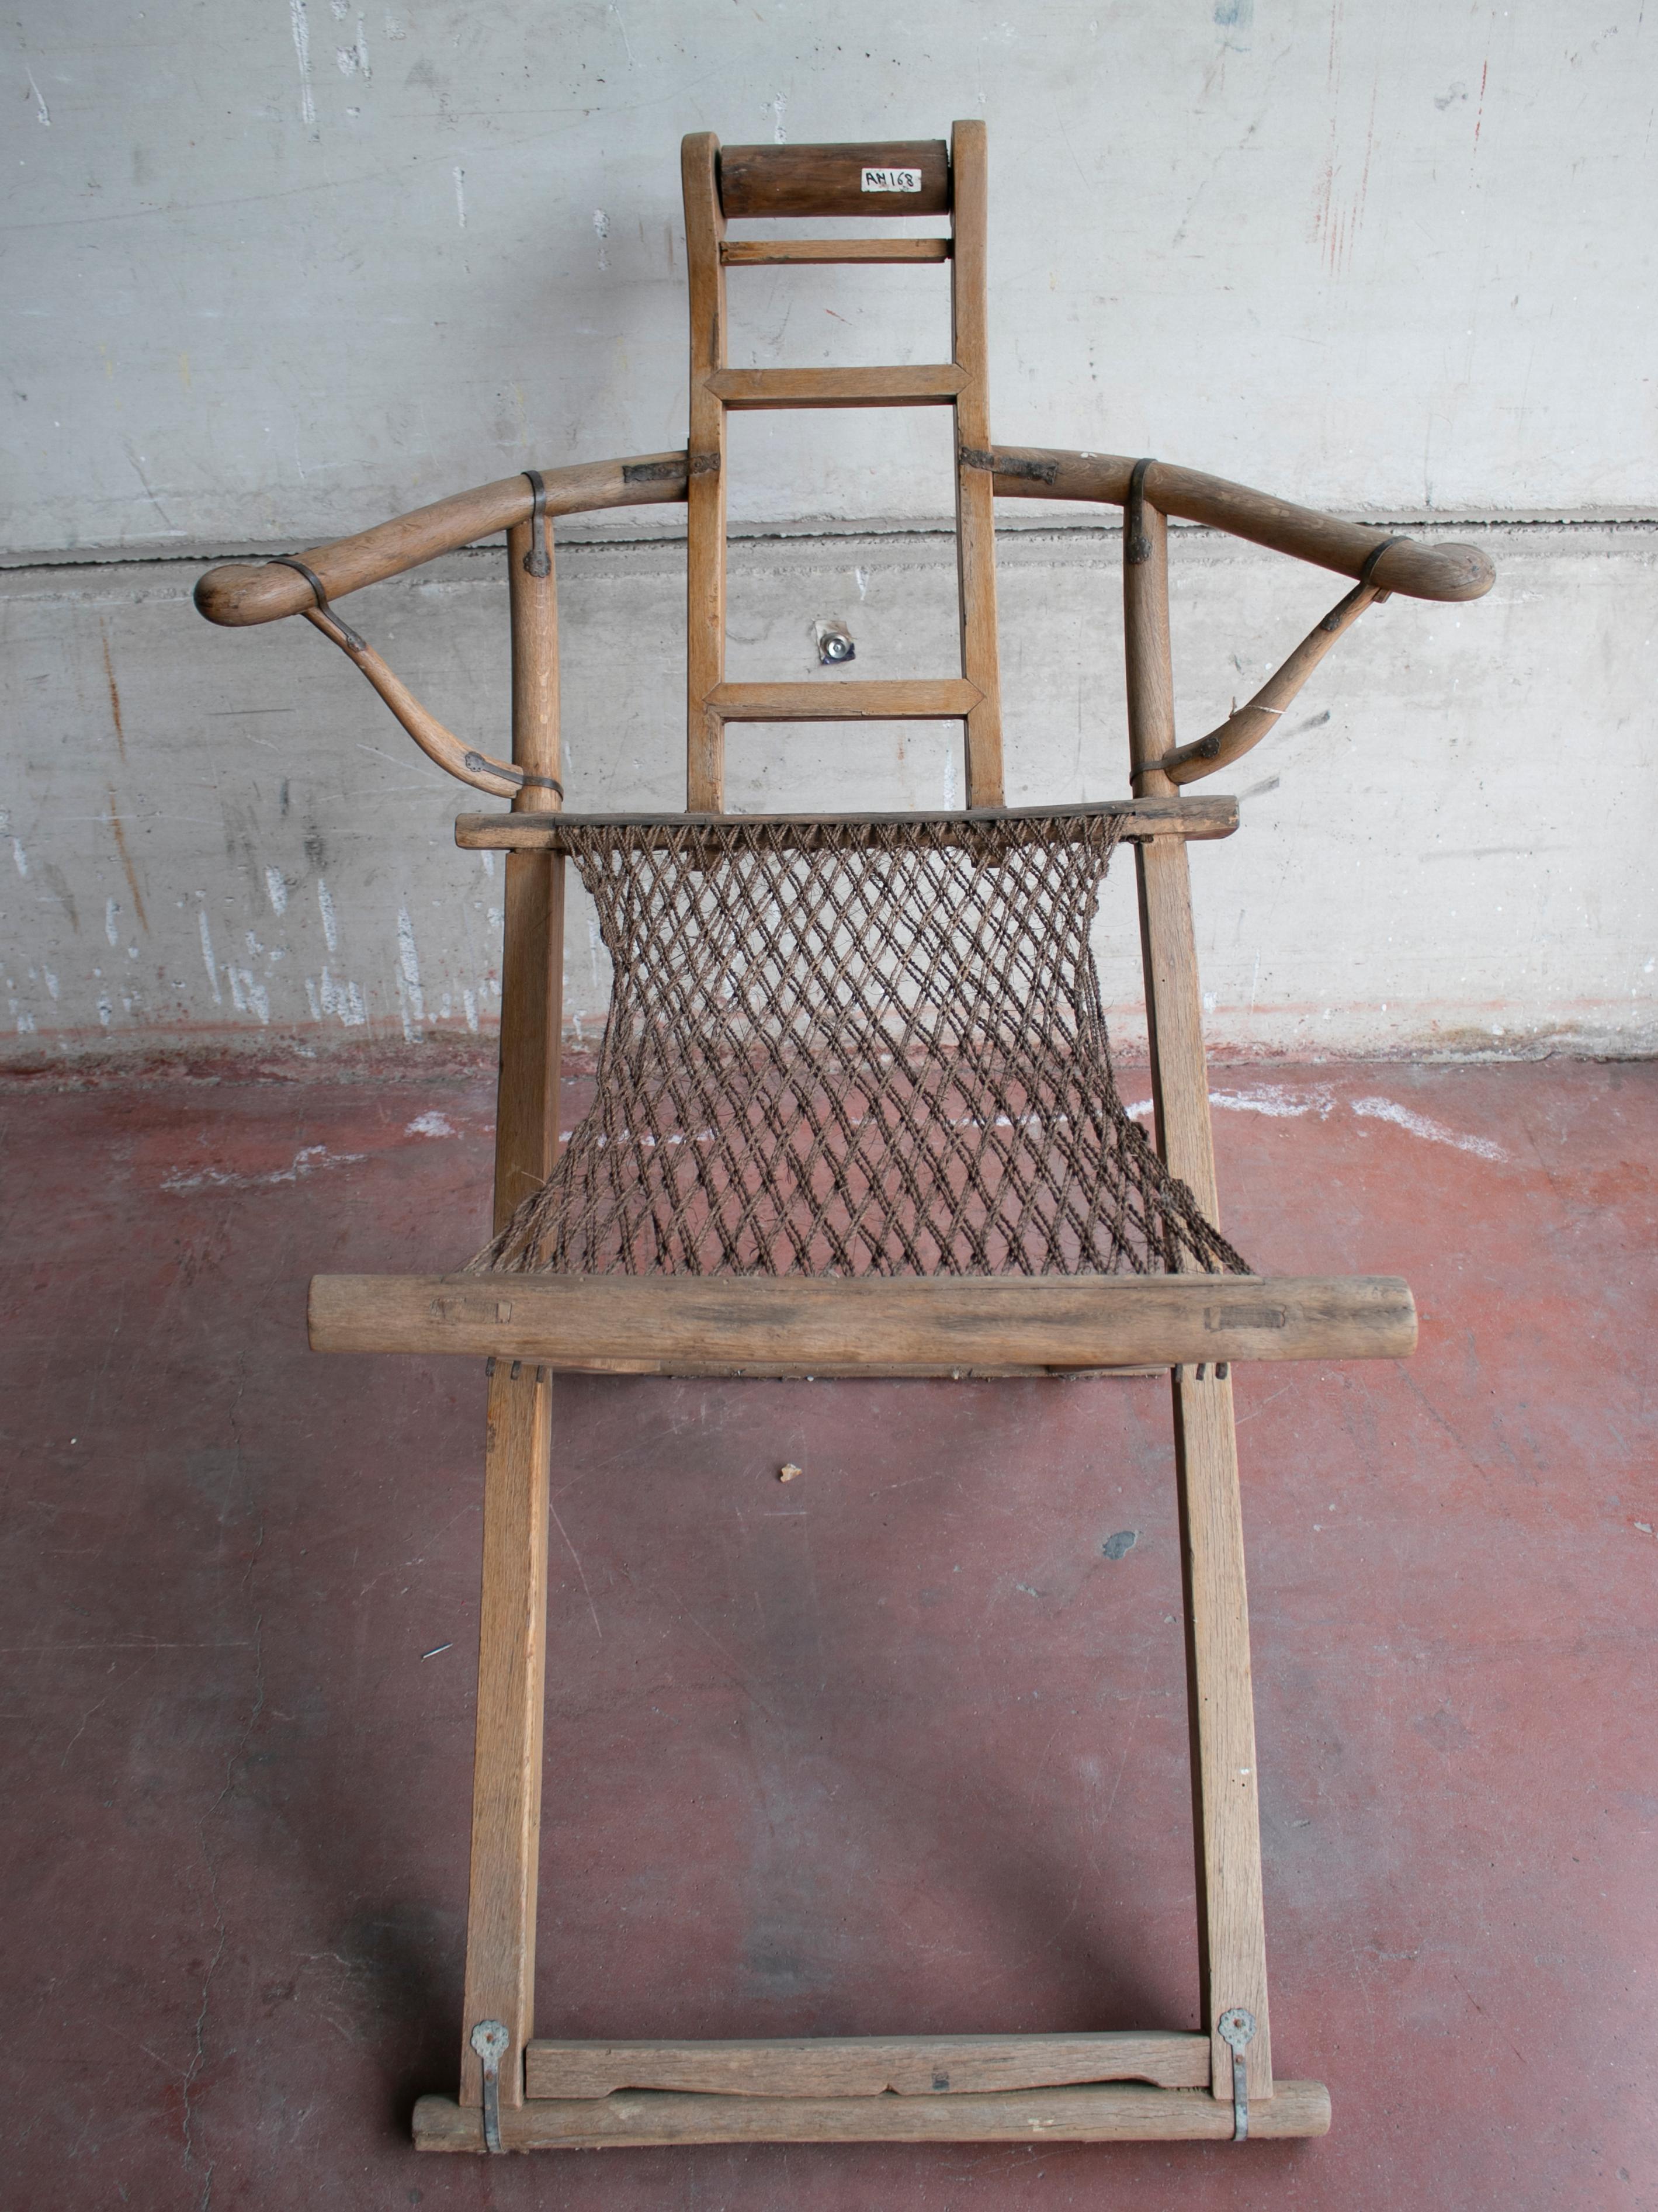 1950s Chinese deck sofa chair with arms and woven string seat.